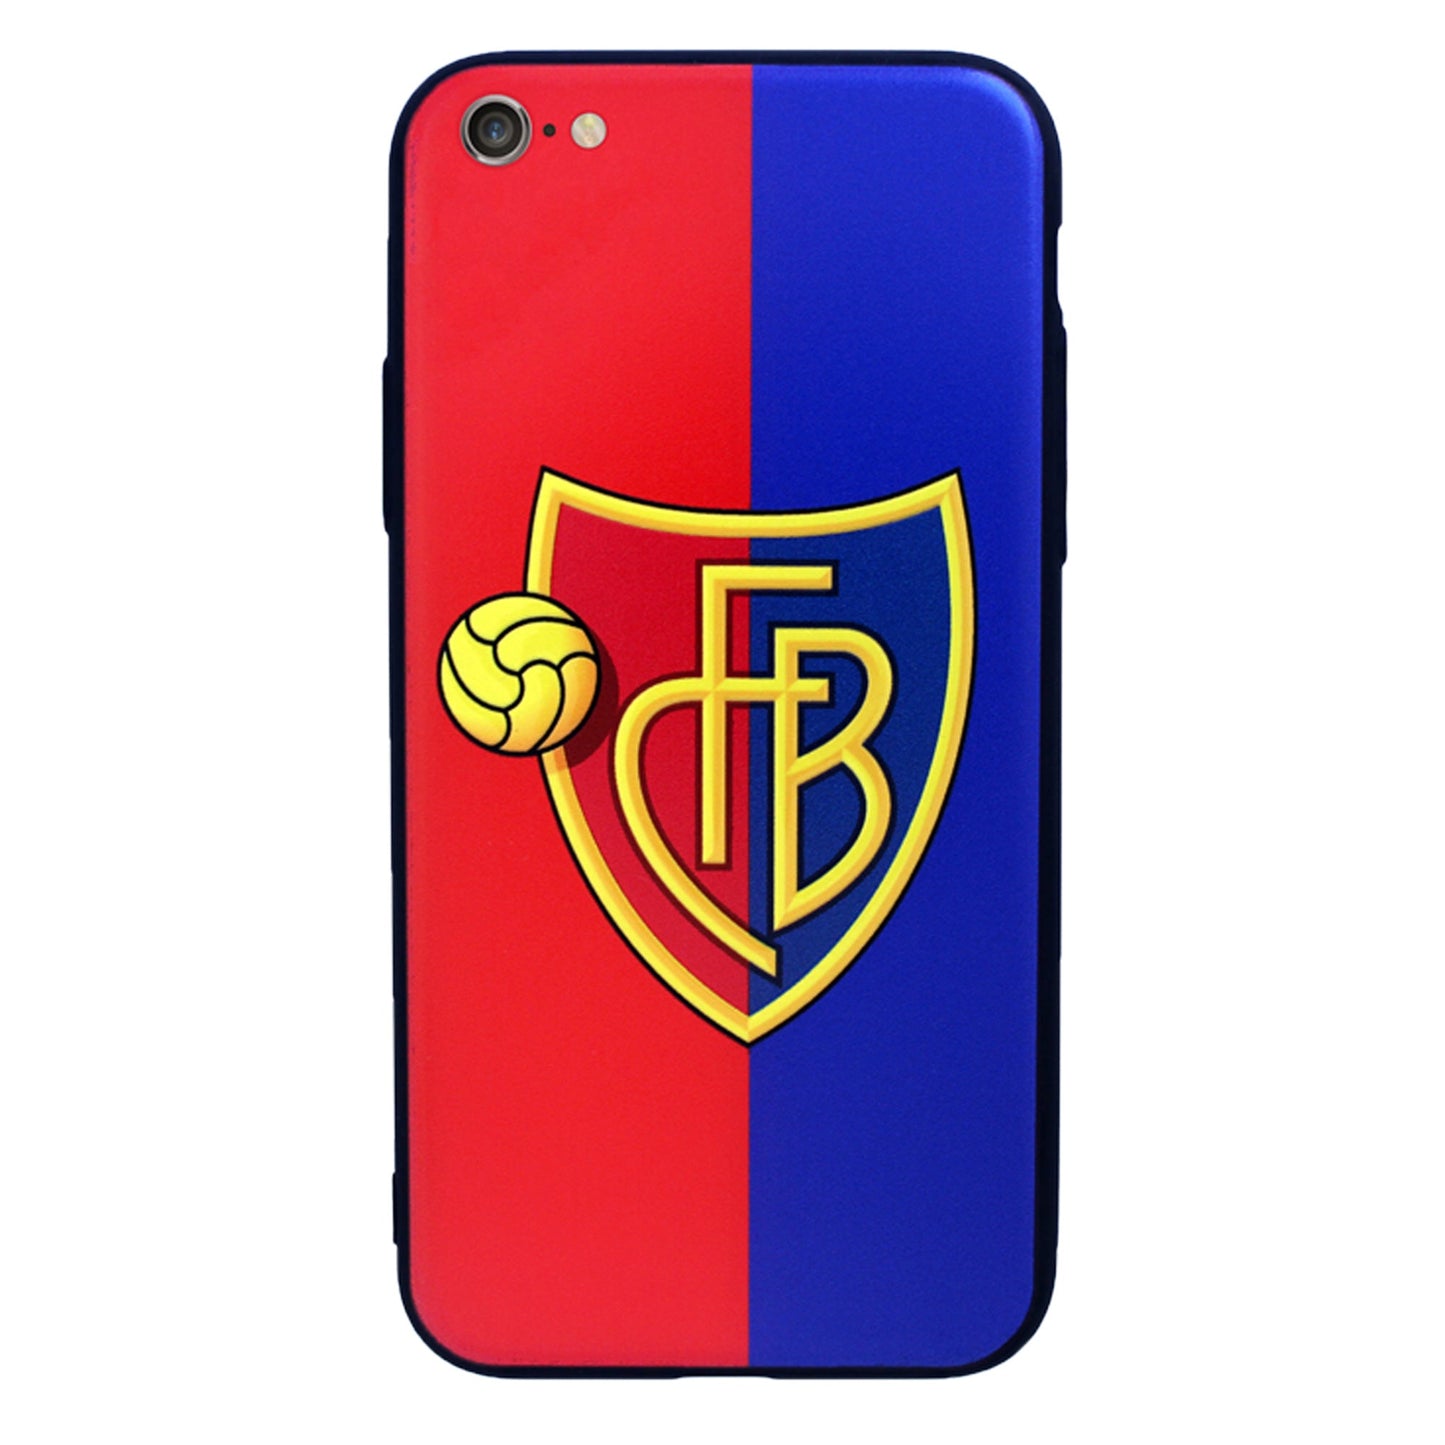 FCB Soft Case for iPhone 6/6S Plus